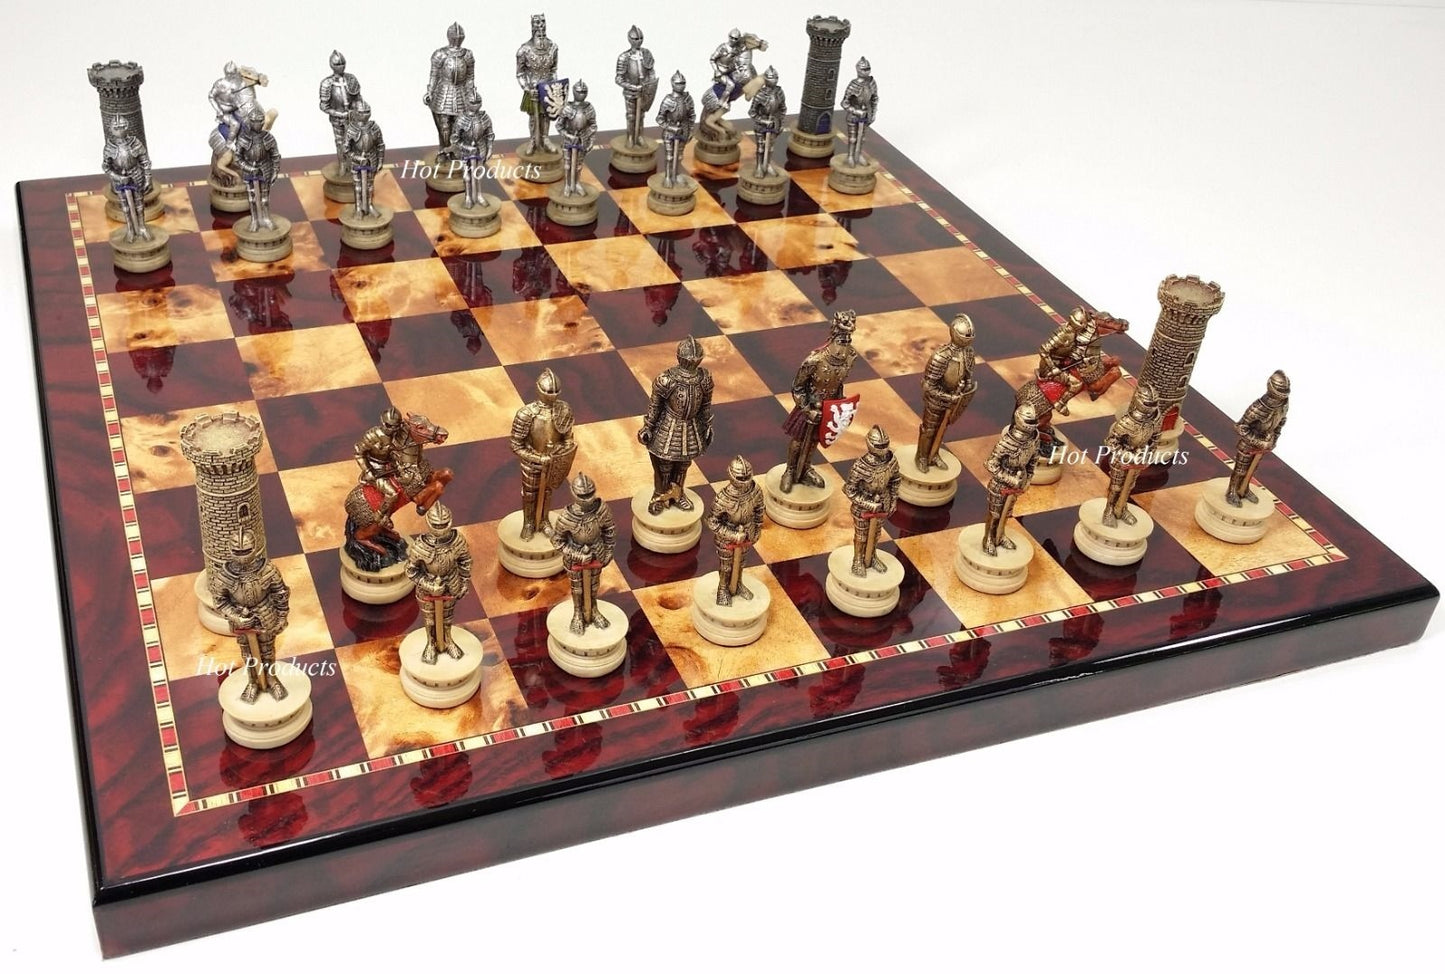 Medieval Times Crusades Gold Silver Armored Knight Chess Set Cherry Color Board